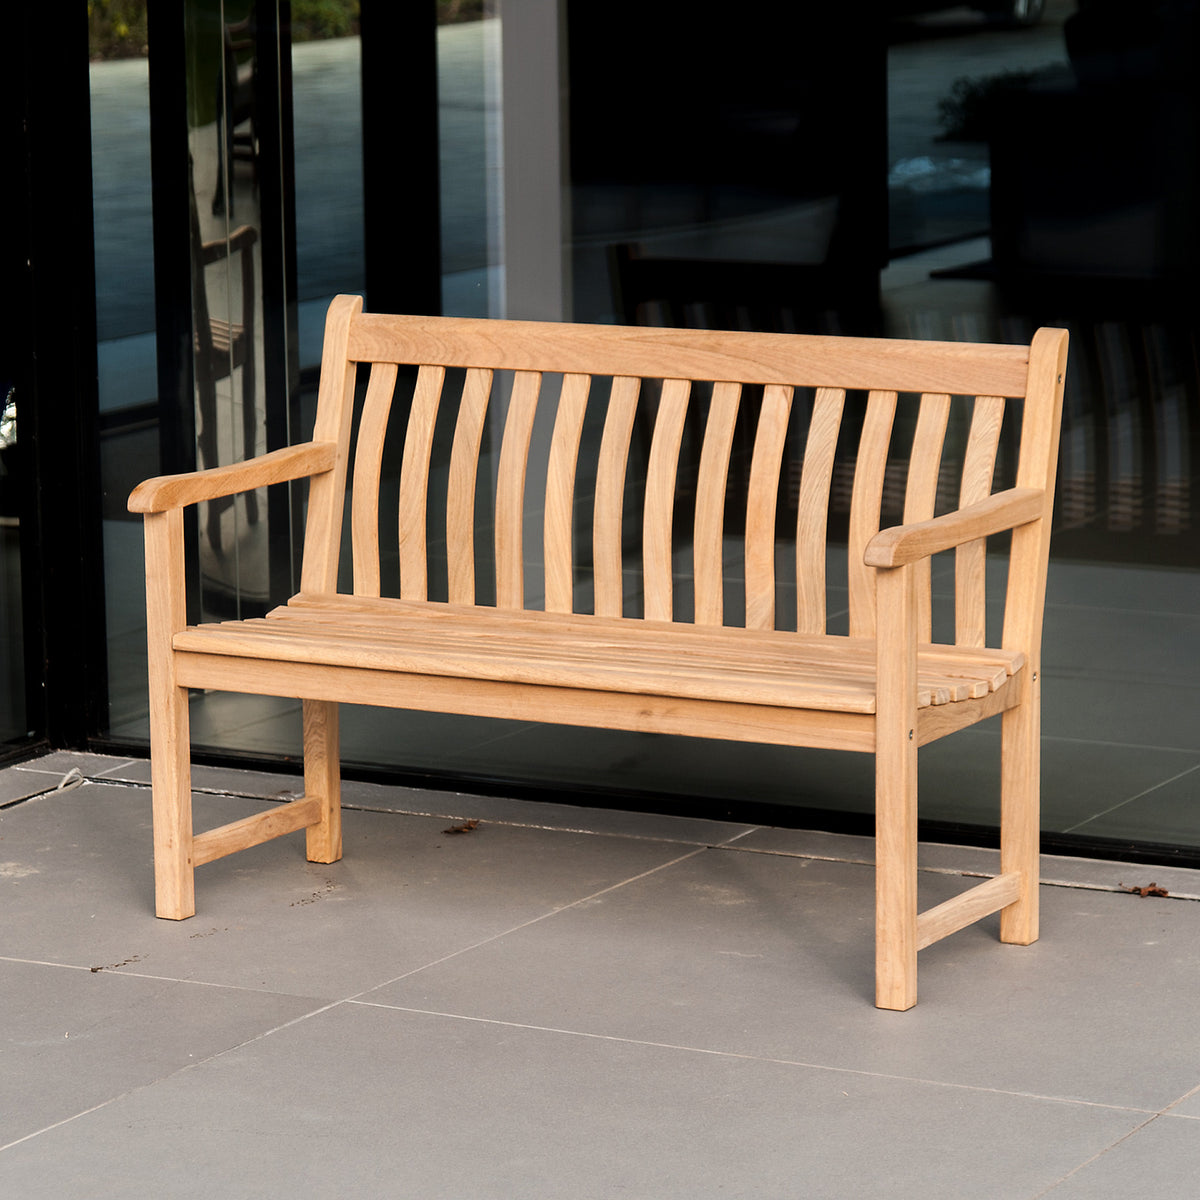 Alexander Rose Roble Broadfield Bench 4ft (1.2m)